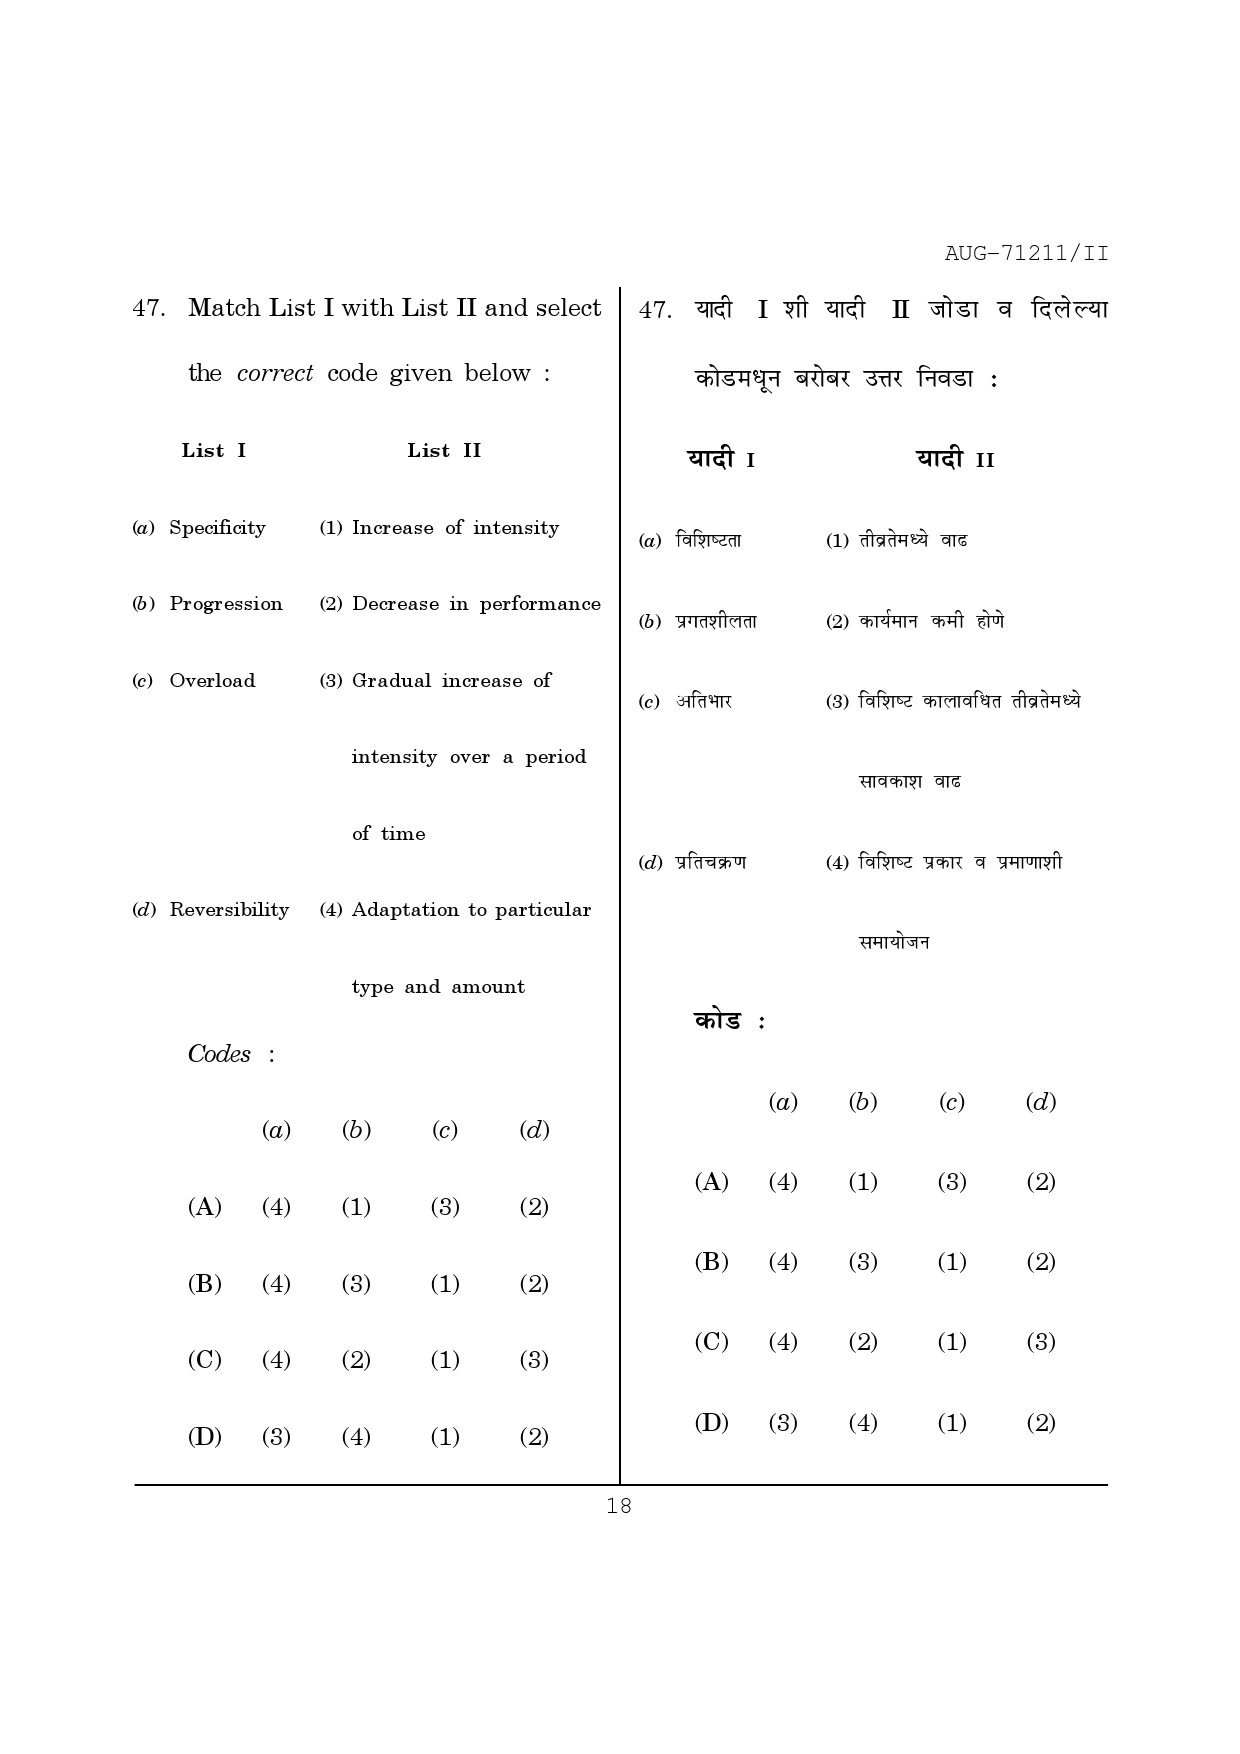 Maharashtra SET Physical Education Question Paper II August 2011 18